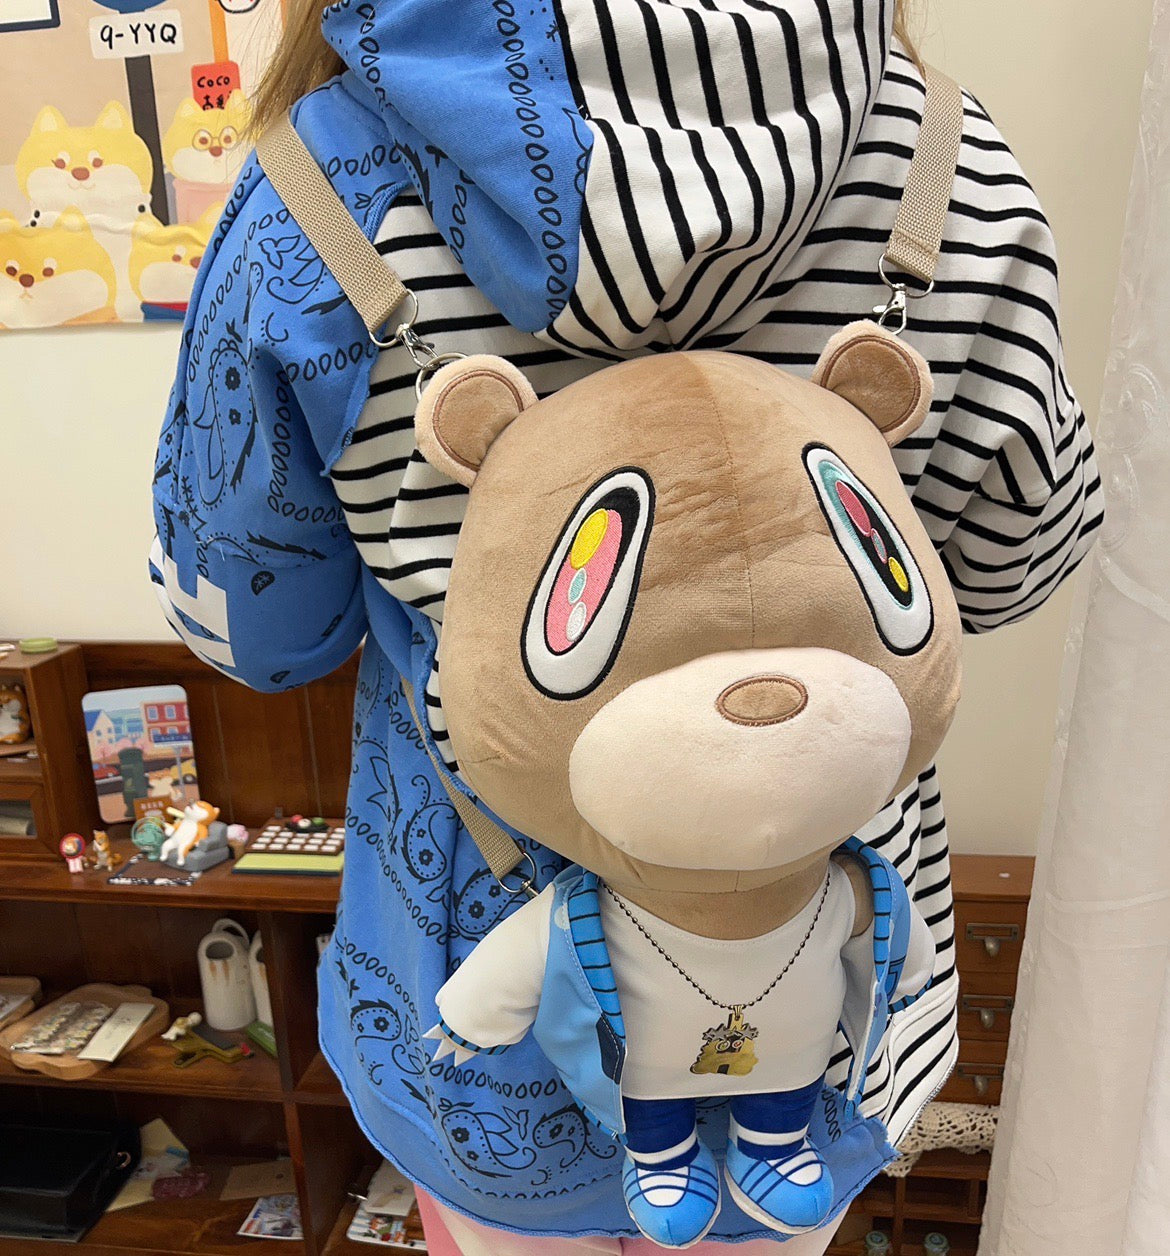 Collections Kanye Dropout Bear Backpack